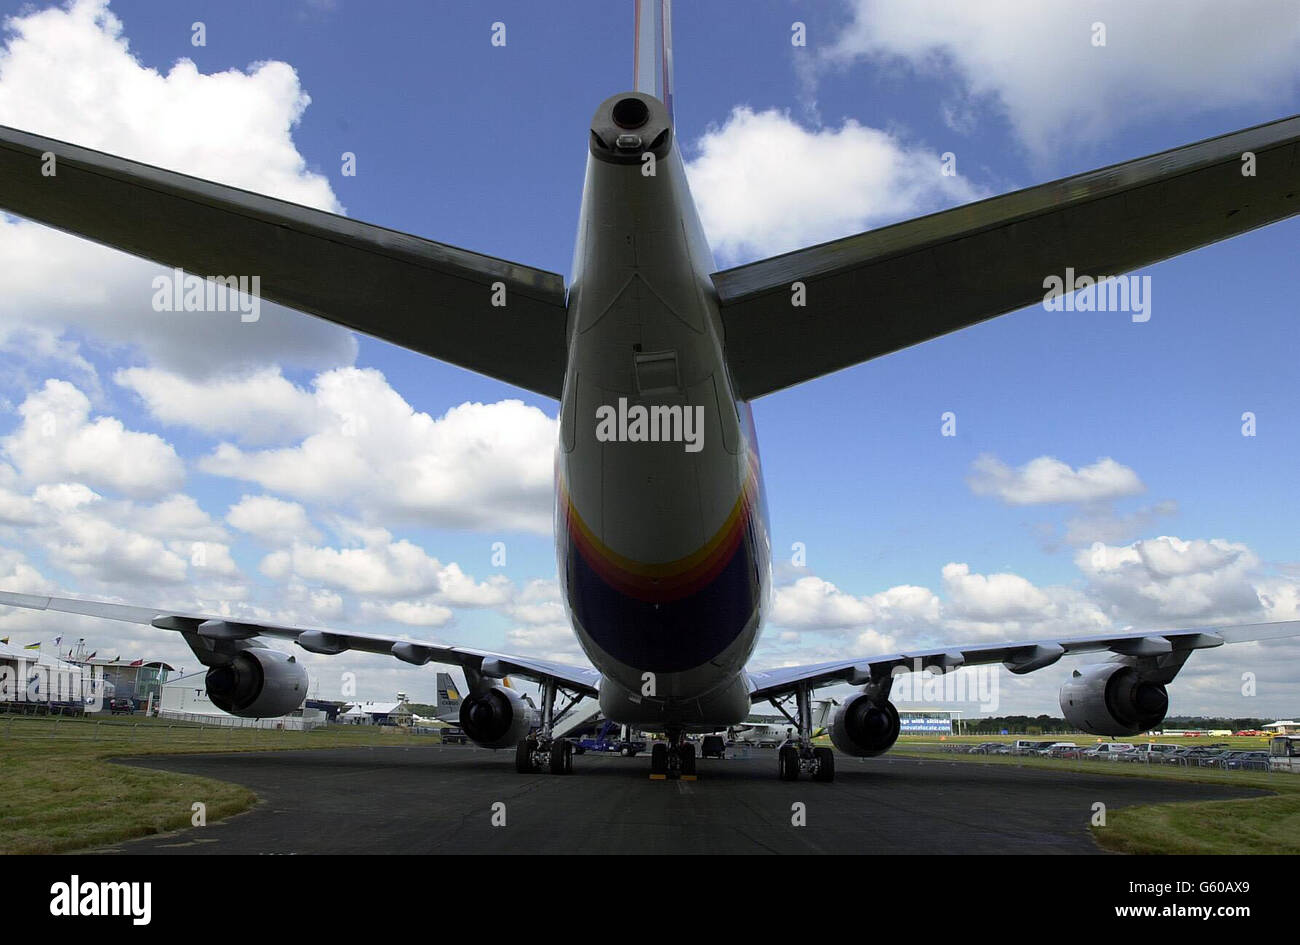 The A340-600 Air bus - the largest aircraft on display at the Farnborough air show. Stock Photo